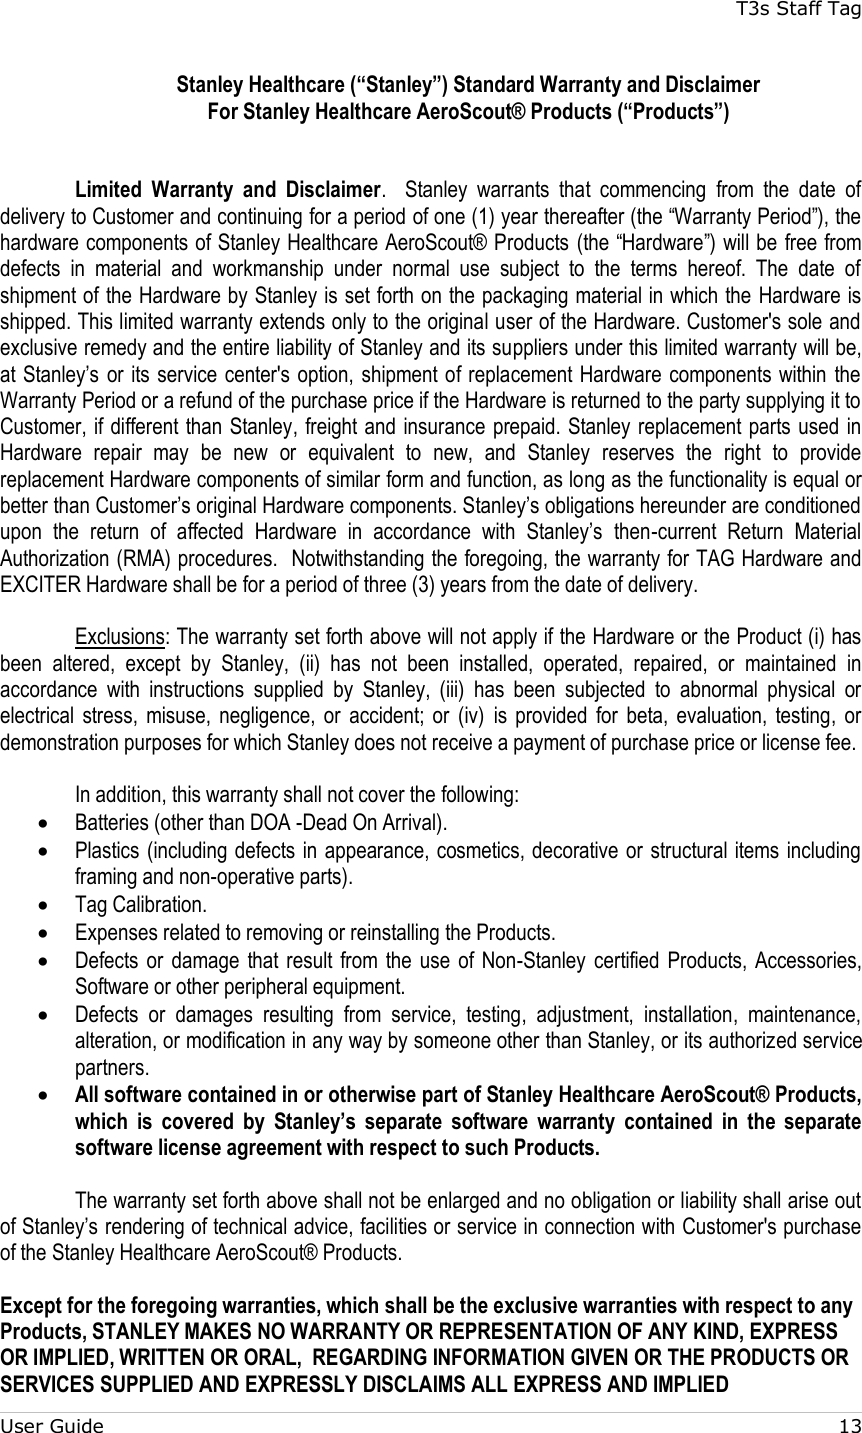 T3s Staff Tag  User Guide    13 Stanley Healthcare (“Stanley”) Standard Warranty and Disclaimer  For Stanley Healthcare AeroScout® Products (“Products”)   Limited  Warranty  and  Disclaimer.    Stanley  warrants  that  commencing  from  the  date  of delivery to Customer and continuing for a period of one (1) year thereafter (the “Warranty Period”), the hardware components of Stanley Healthcare AeroScout® Products (the “Hardware”) will be free from defects  in  material  and  workmanship  under  normal  use  subject  to  the  terms  hereof.  The  date  of shipment of the Hardware by Stanley is set forth on the packaging material in which the Hardware is shipped. This limited warranty extends only to the original user of the Hardware. Customer&apos;s sole and exclusive remedy and the entire liability of Stanley and its suppliers under this limited warranty will be, at Stanley’s or its service center&apos;s option, shipment of replacement Hardware components within  the Warranty Period or a refund of the purchase price if the Hardware is returned to the party supplying it to Customer, if different than Stanley, freight and insurance  prepaid. Stanley replacement parts used in Hardware  repair  may  be  new  or  equivalent  to  new,  and  Stanley  reserves  the  right  to  provide replacement Hardware components of similar form and function, as long as the functionality is equal or better than Customer’s original Hardware components. Stanley’s obligations hereunder are conditioned upon  the  return  of  affected  Hardware  in  accordance  with  Stanley’s  then-current  Return  Material Authorization (RMA) procedures.  Notwithstanding the foregoing, the warranty for TAG Hardware and EXCITER Hardware shall be for a period of three (3) years from the date of delivery.  Exclusions: The warranty set forth above will not apply if the Hardware or the Product (i) has been  altered,  except  by  Stanley,  (ii)  has  not  been  installed,  operated,  repaired,  or  maintained  in accordance  with  instructions  supplied  by  Stanley,  (iii)  has  been  subjected  to  abnormal  physical  or electrical  stress,  misuse,  negligence,  or  accident;  or  (iv)  is  provided  for  beta,  evaluation,  testing,  or demonstration purposes for which Stanley does not receive a payment of purchase price or license fee.  In addition, this warranty shall not cover the following:  Batteries (other than DOA -Dead On Arrival).  Plastics (including defects in appearance, cosmetics, decorative or  structural items including framing and non-operative parts).  Tag Calibration.  Expenses related to removing or reinstalling the Products.  Defects  or  damage  that result from  the use  of  Non-Stanley  certified  Products, Accessories, Software or other peripheral equipment.  Defects  or  damages  resulting  from  service,  testing,  adjustment,  installation,  maintenance, alteration, or modification in any way by someone other than Stanley, or its authorized service partners.  All software contained in or otherwise part of Stanley Healthcare AeroScout® Products, which  is  covered  by  Stanley’s  separate  software  warranty  contained  in  the  separate software license agreement with respect to such Products.  The warranty set forth above shall not be enlarged and no obligation or liability shall arise out of Stanley’s rendering of technical advice, facilities or service in connection with Customer&apos;s purchase of the Stanley Healthcare AeroScout® Products.    Except for the foregoing warranties, which shall be the exclusive warranties with respect to any Products, STANLEY MAKES NO WARRANTY OR REPRESENTATION OF ANY KIND, EXPRESS OR IMPLIED, WRITTEN OR ORAL,  REGARDING INFORMATION GIVEN OR THE PRODUCTS OR SERVICES SUPPLIED AND EXPRESSLY DISCLAIMS ALL EXPRESS AND IMPLIED 